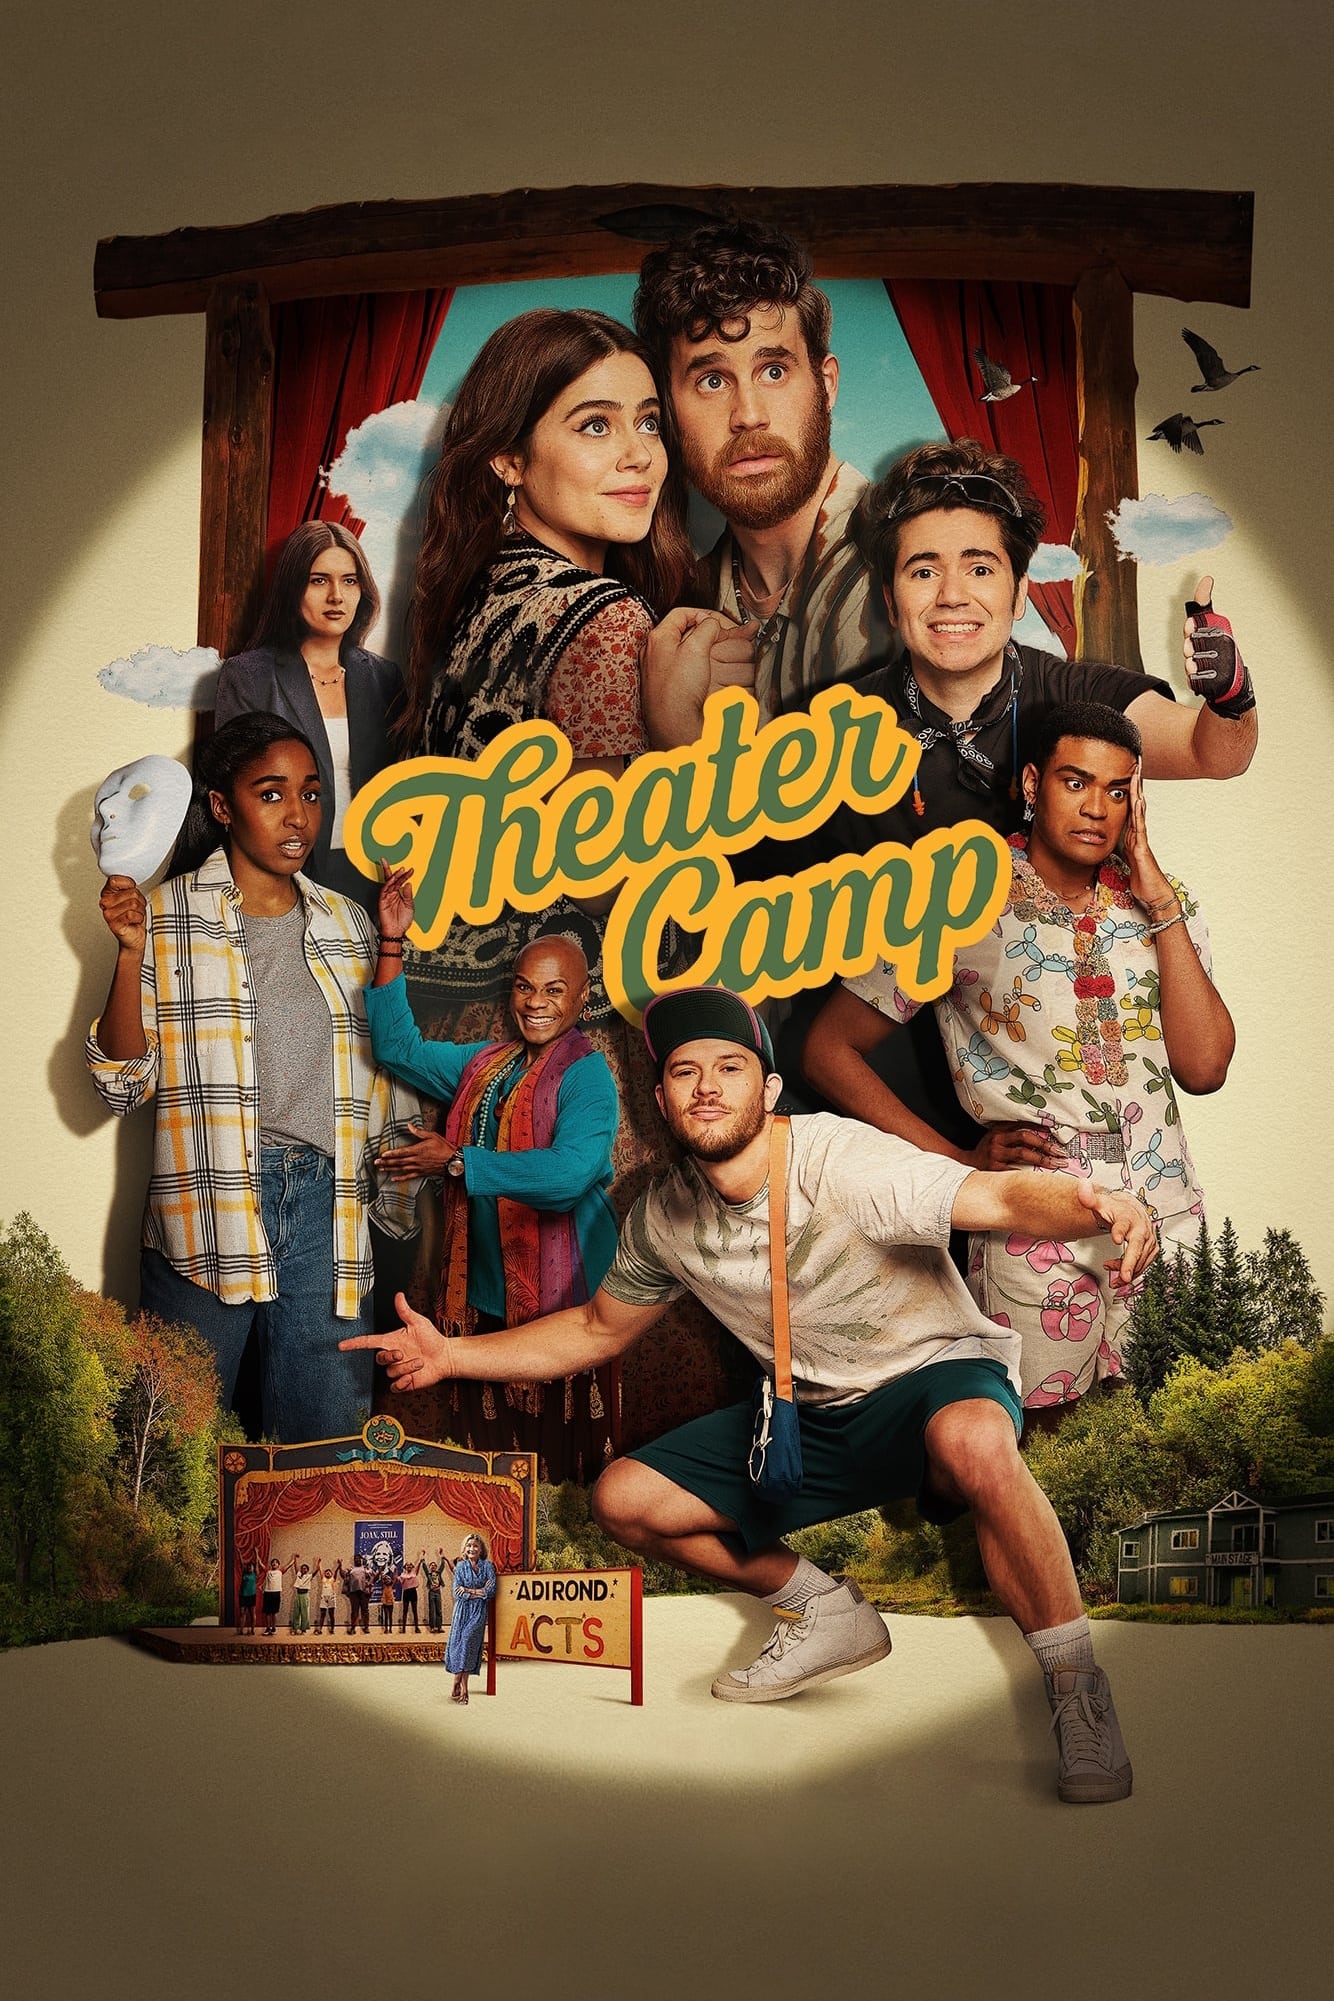 Poster for the movie "Theater Camp"